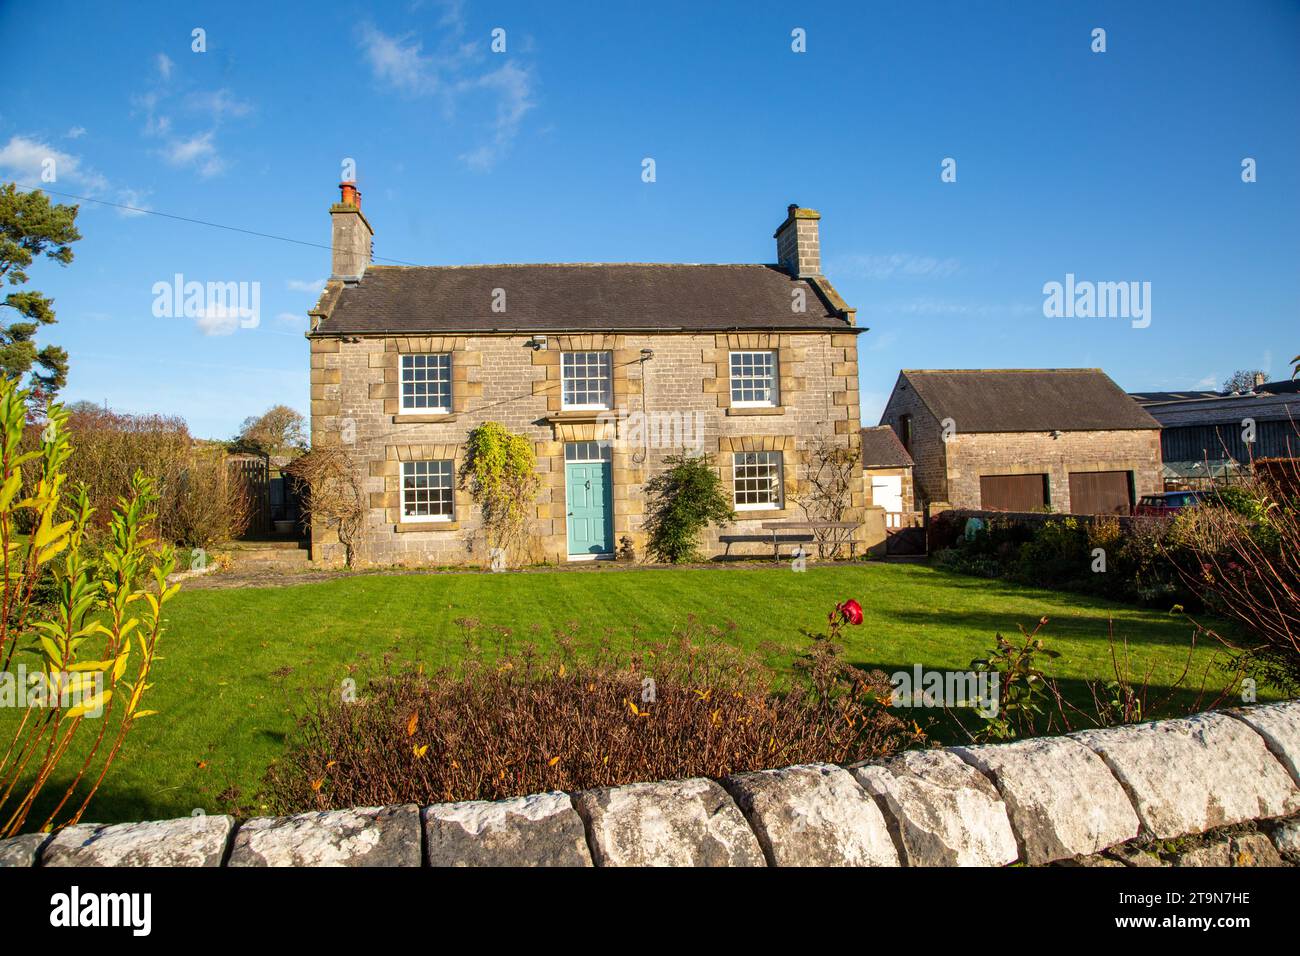 Farmhouse style country cottage in the Staffordshire Moorlands  Peak District village of Alstonefield England UK during winter Stock Photo